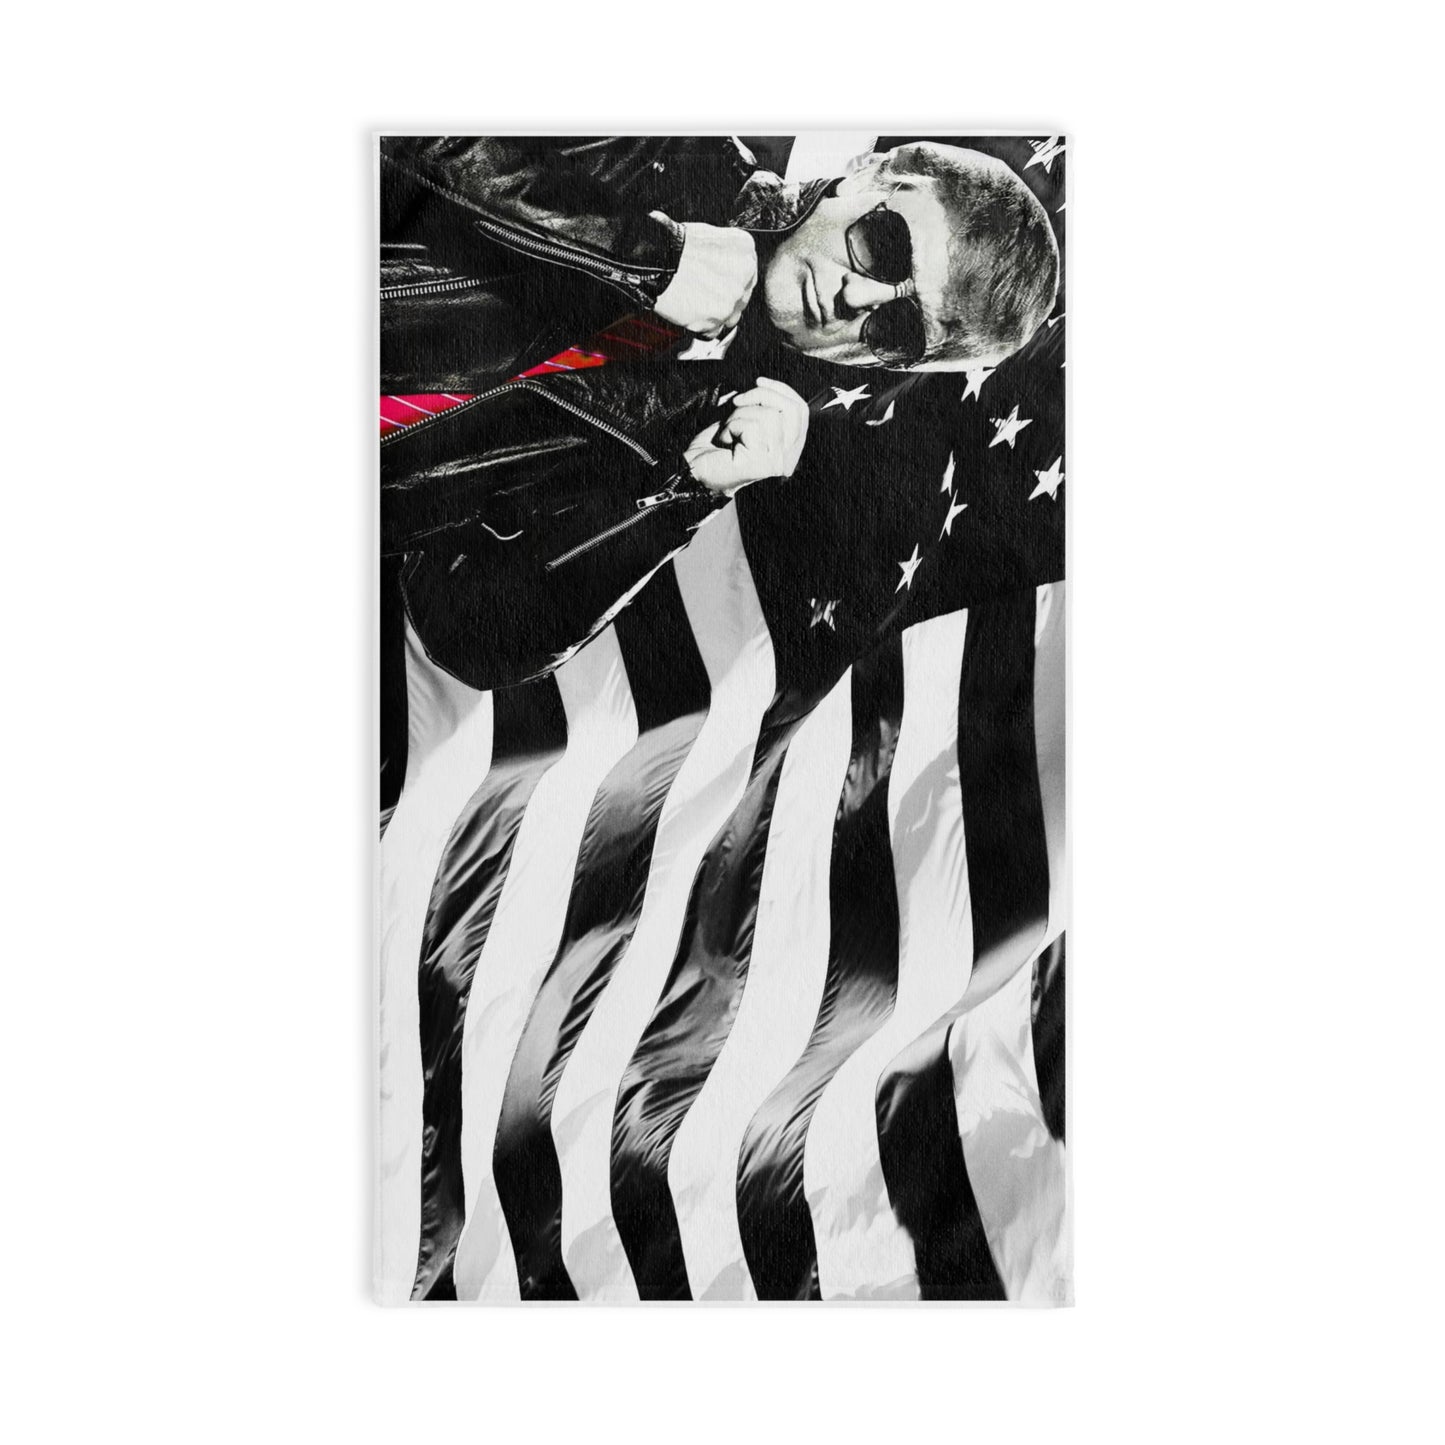 Cool Trump in leather jacket High Definition Print Kitchen Bathroom Soft Hand Towel